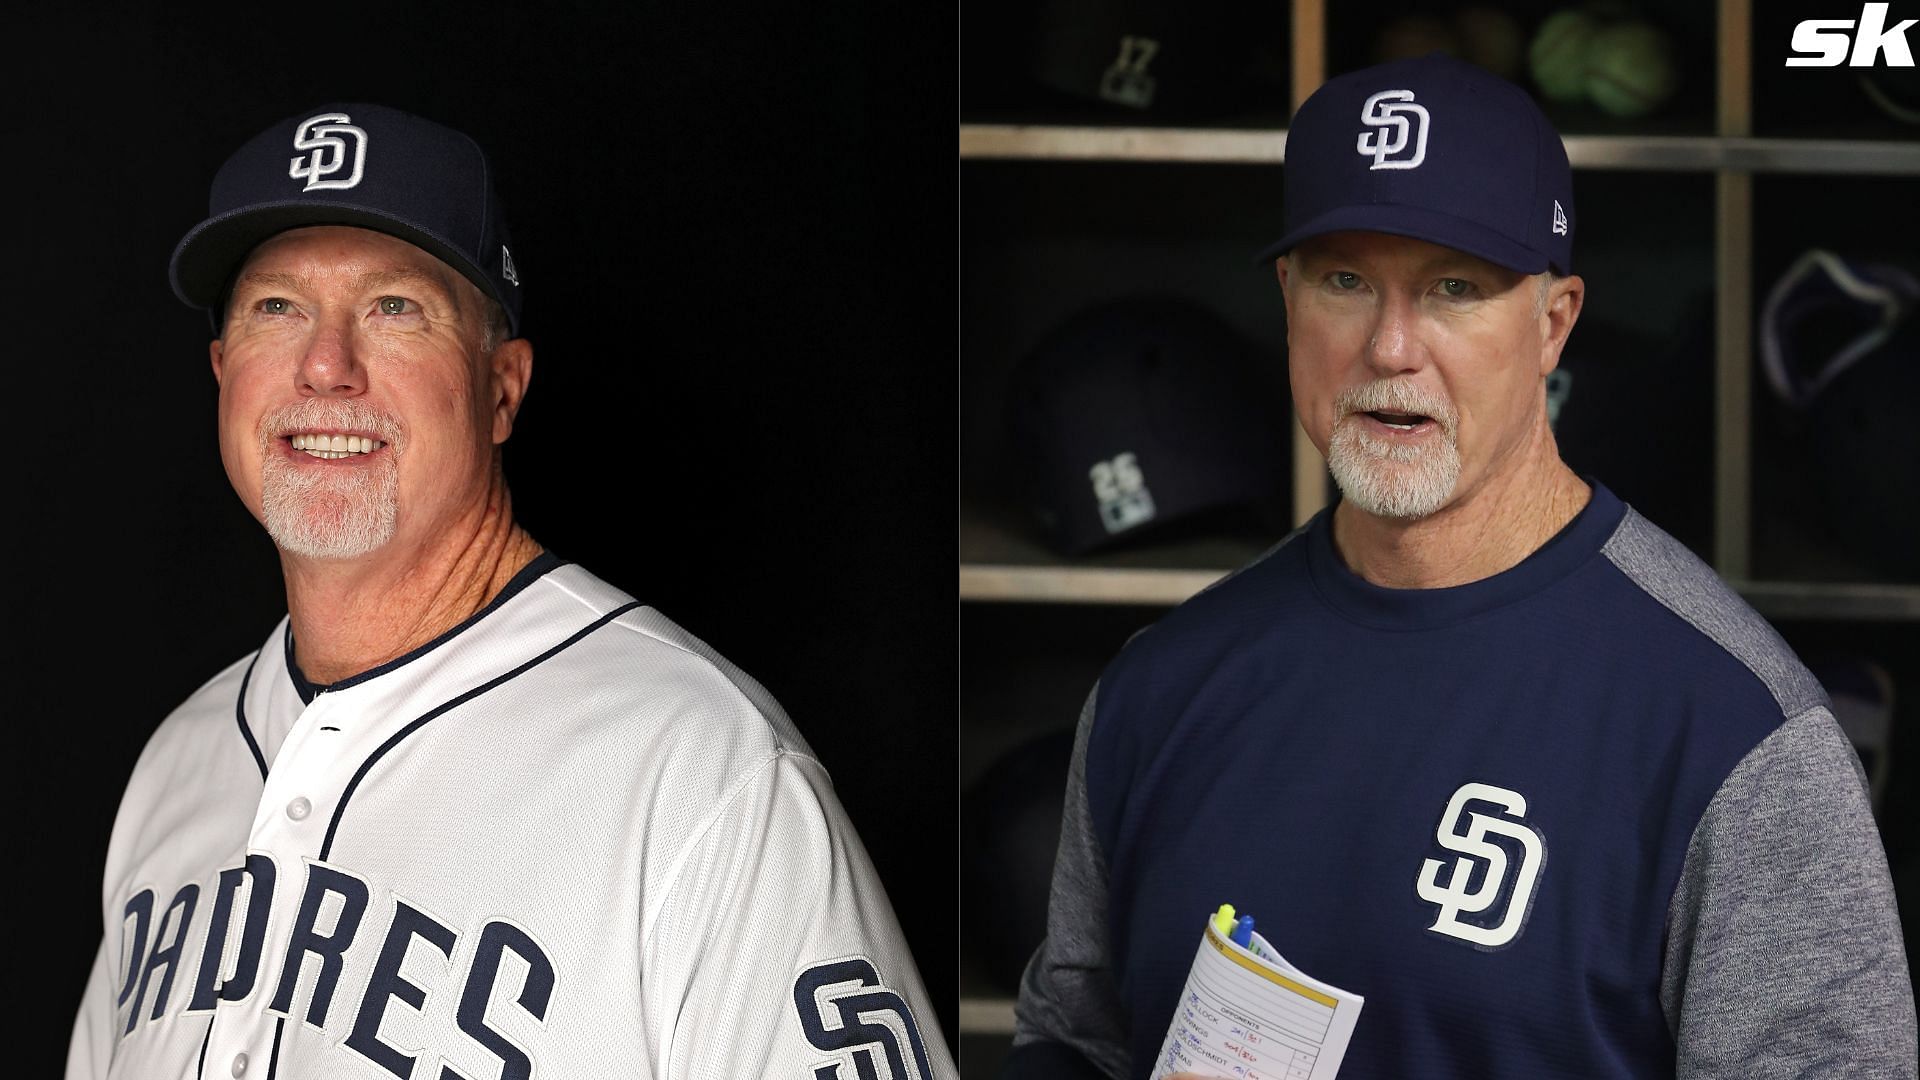 When former Athletics star Mark McGwire resurged as a hitting coach despite  PED-tainted past